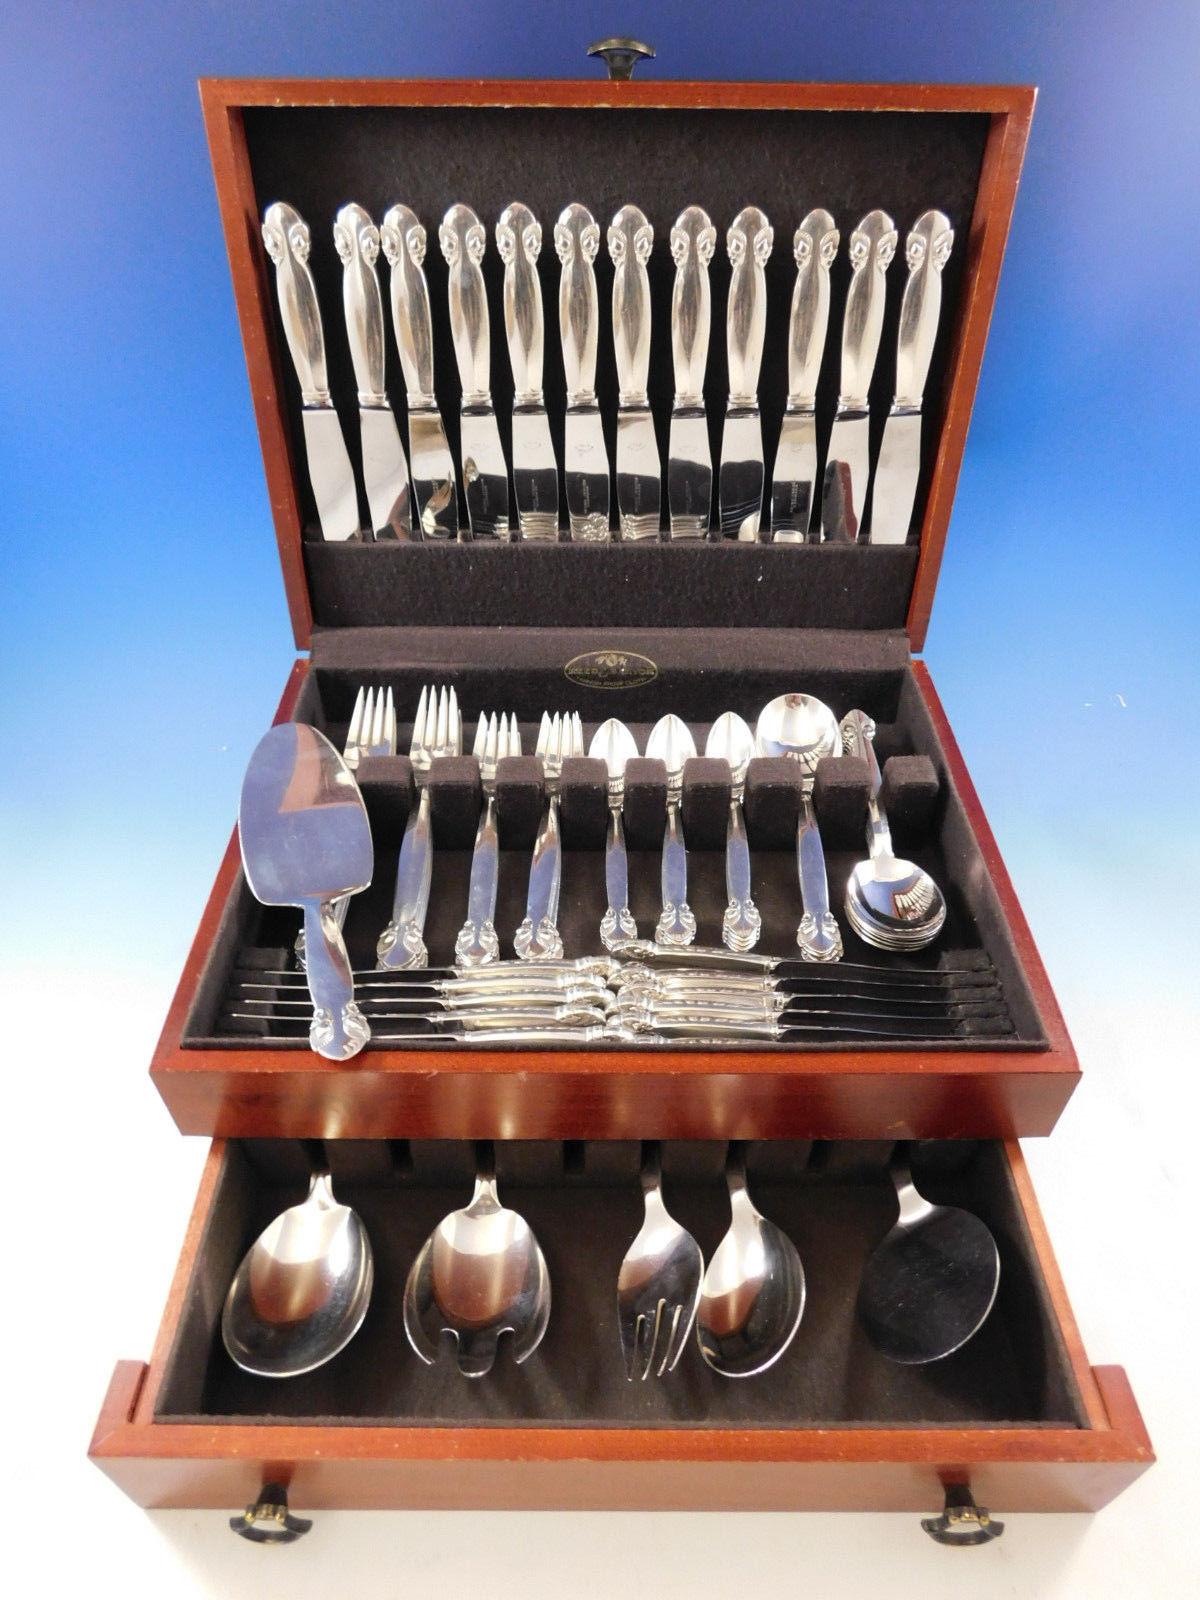 Superb dinner size bittersweet by Georg Jensen sterling silver flatware set, 78 pieces. This set includes:

12 dinner size knives, short wide handles, 9